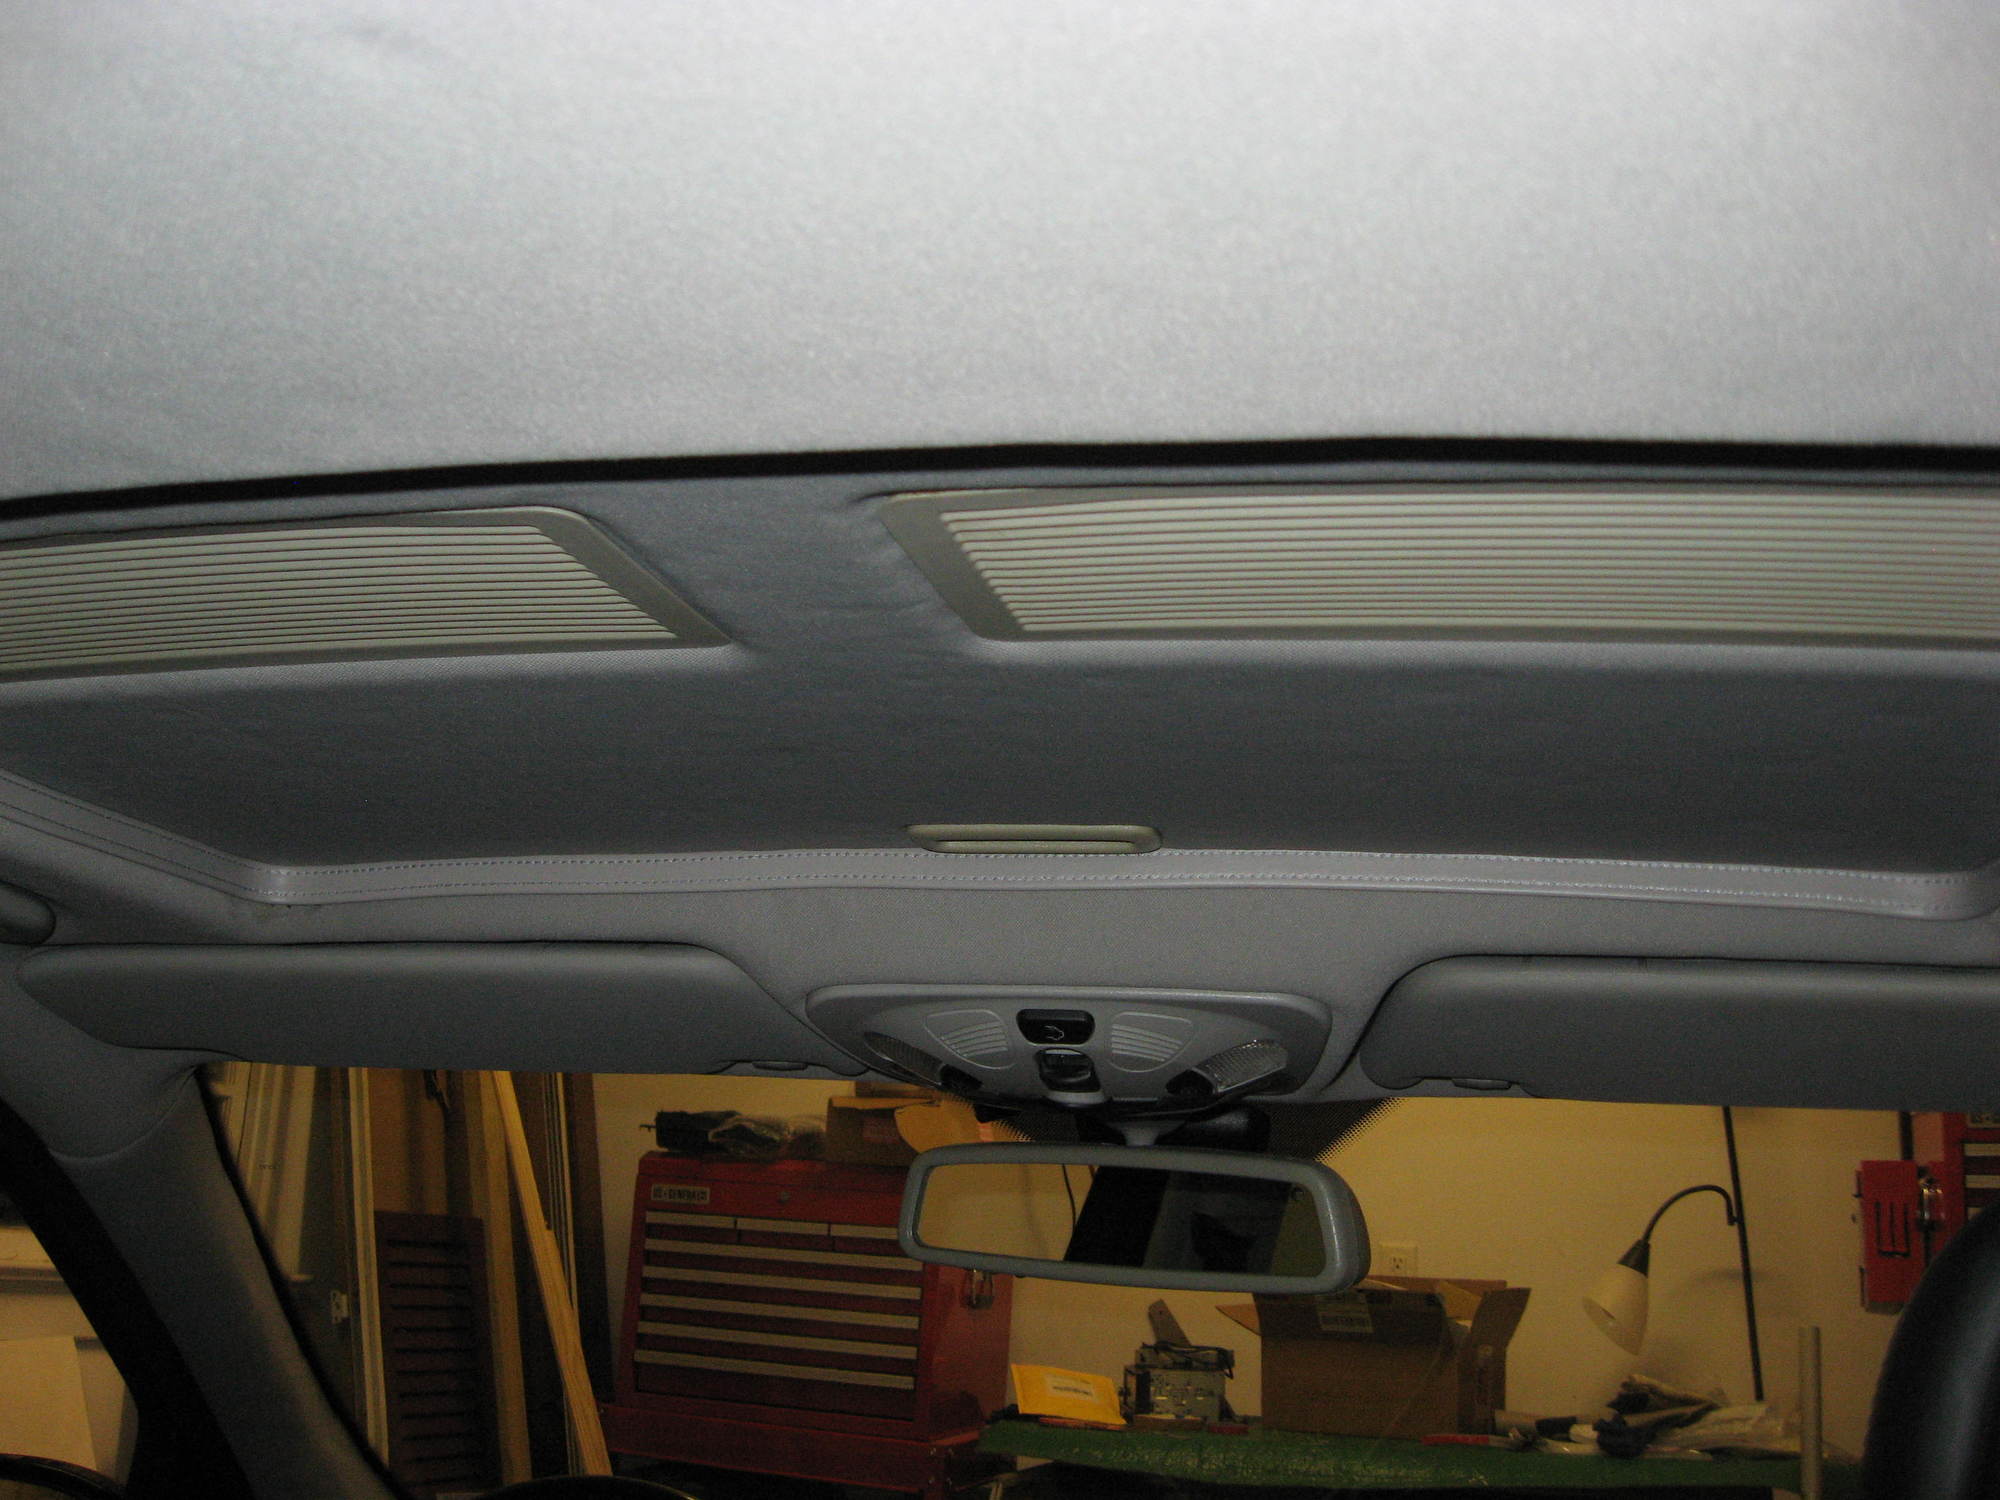 Headliner Fabric Material Fits E36 BMW 3 Series - Clear Gray / No - Sunroof / Yes - A B C PILLARS